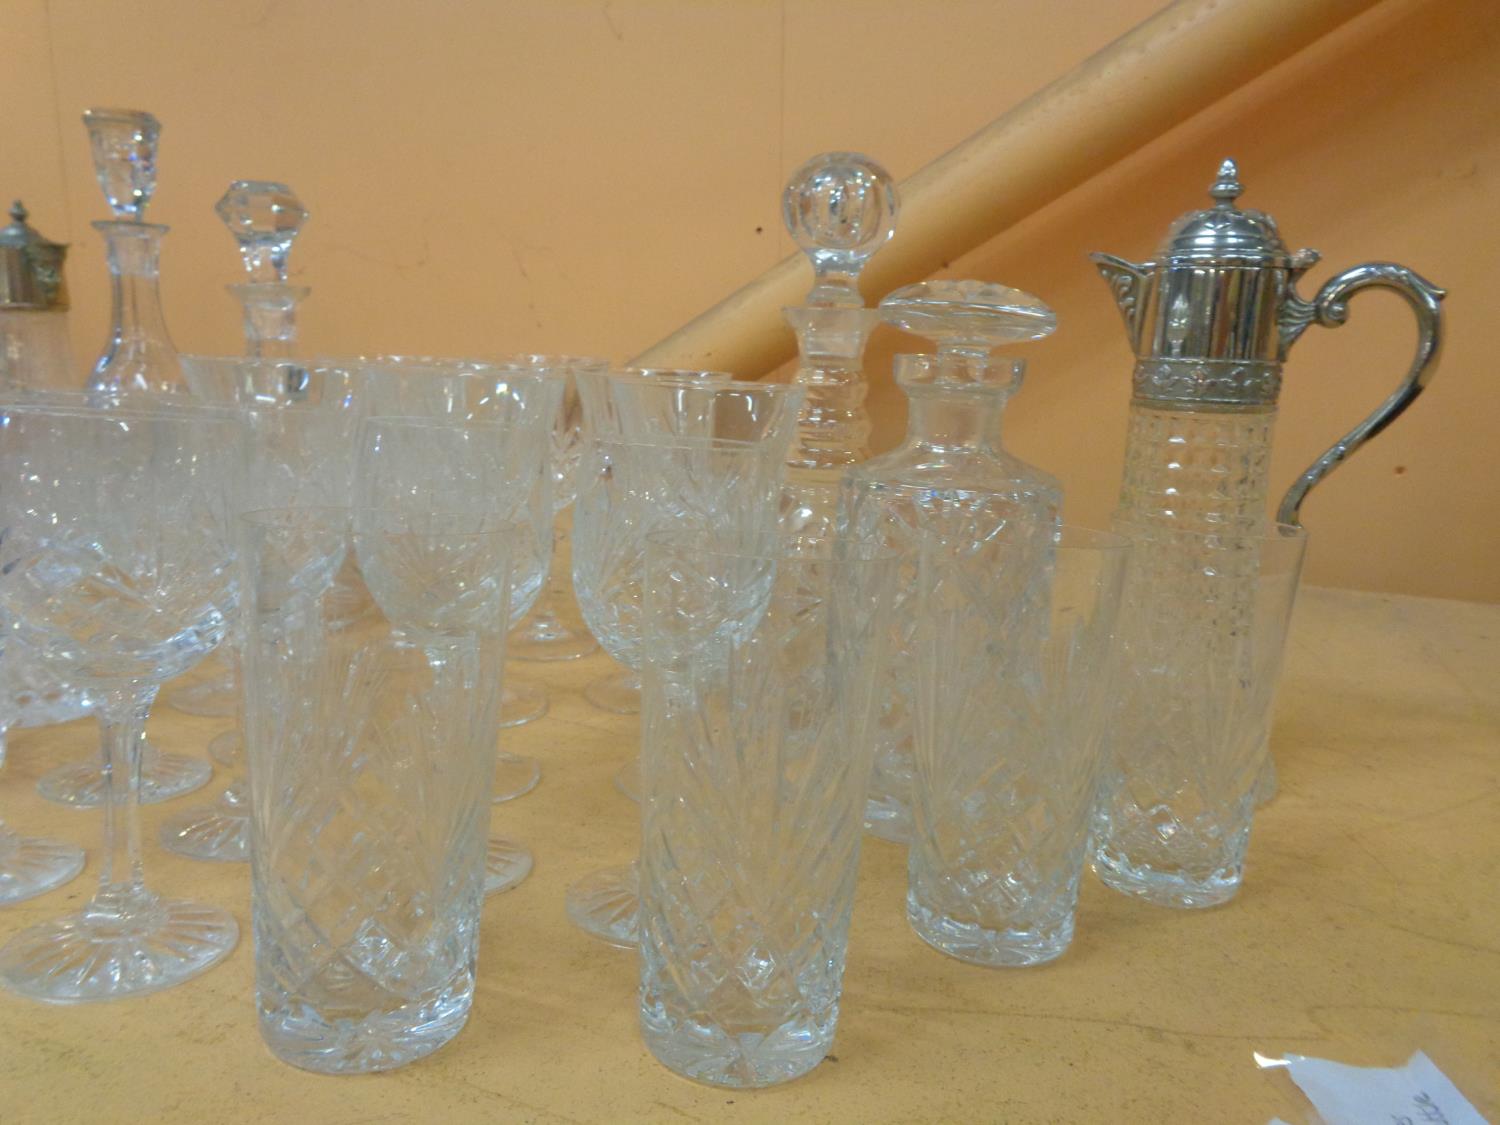 A LARGE COLLECTION OF GLASSWARE INCLUDING DECANTERS AND A VARIETY OF DRINKS GLASSES - Bild 8 aus 8